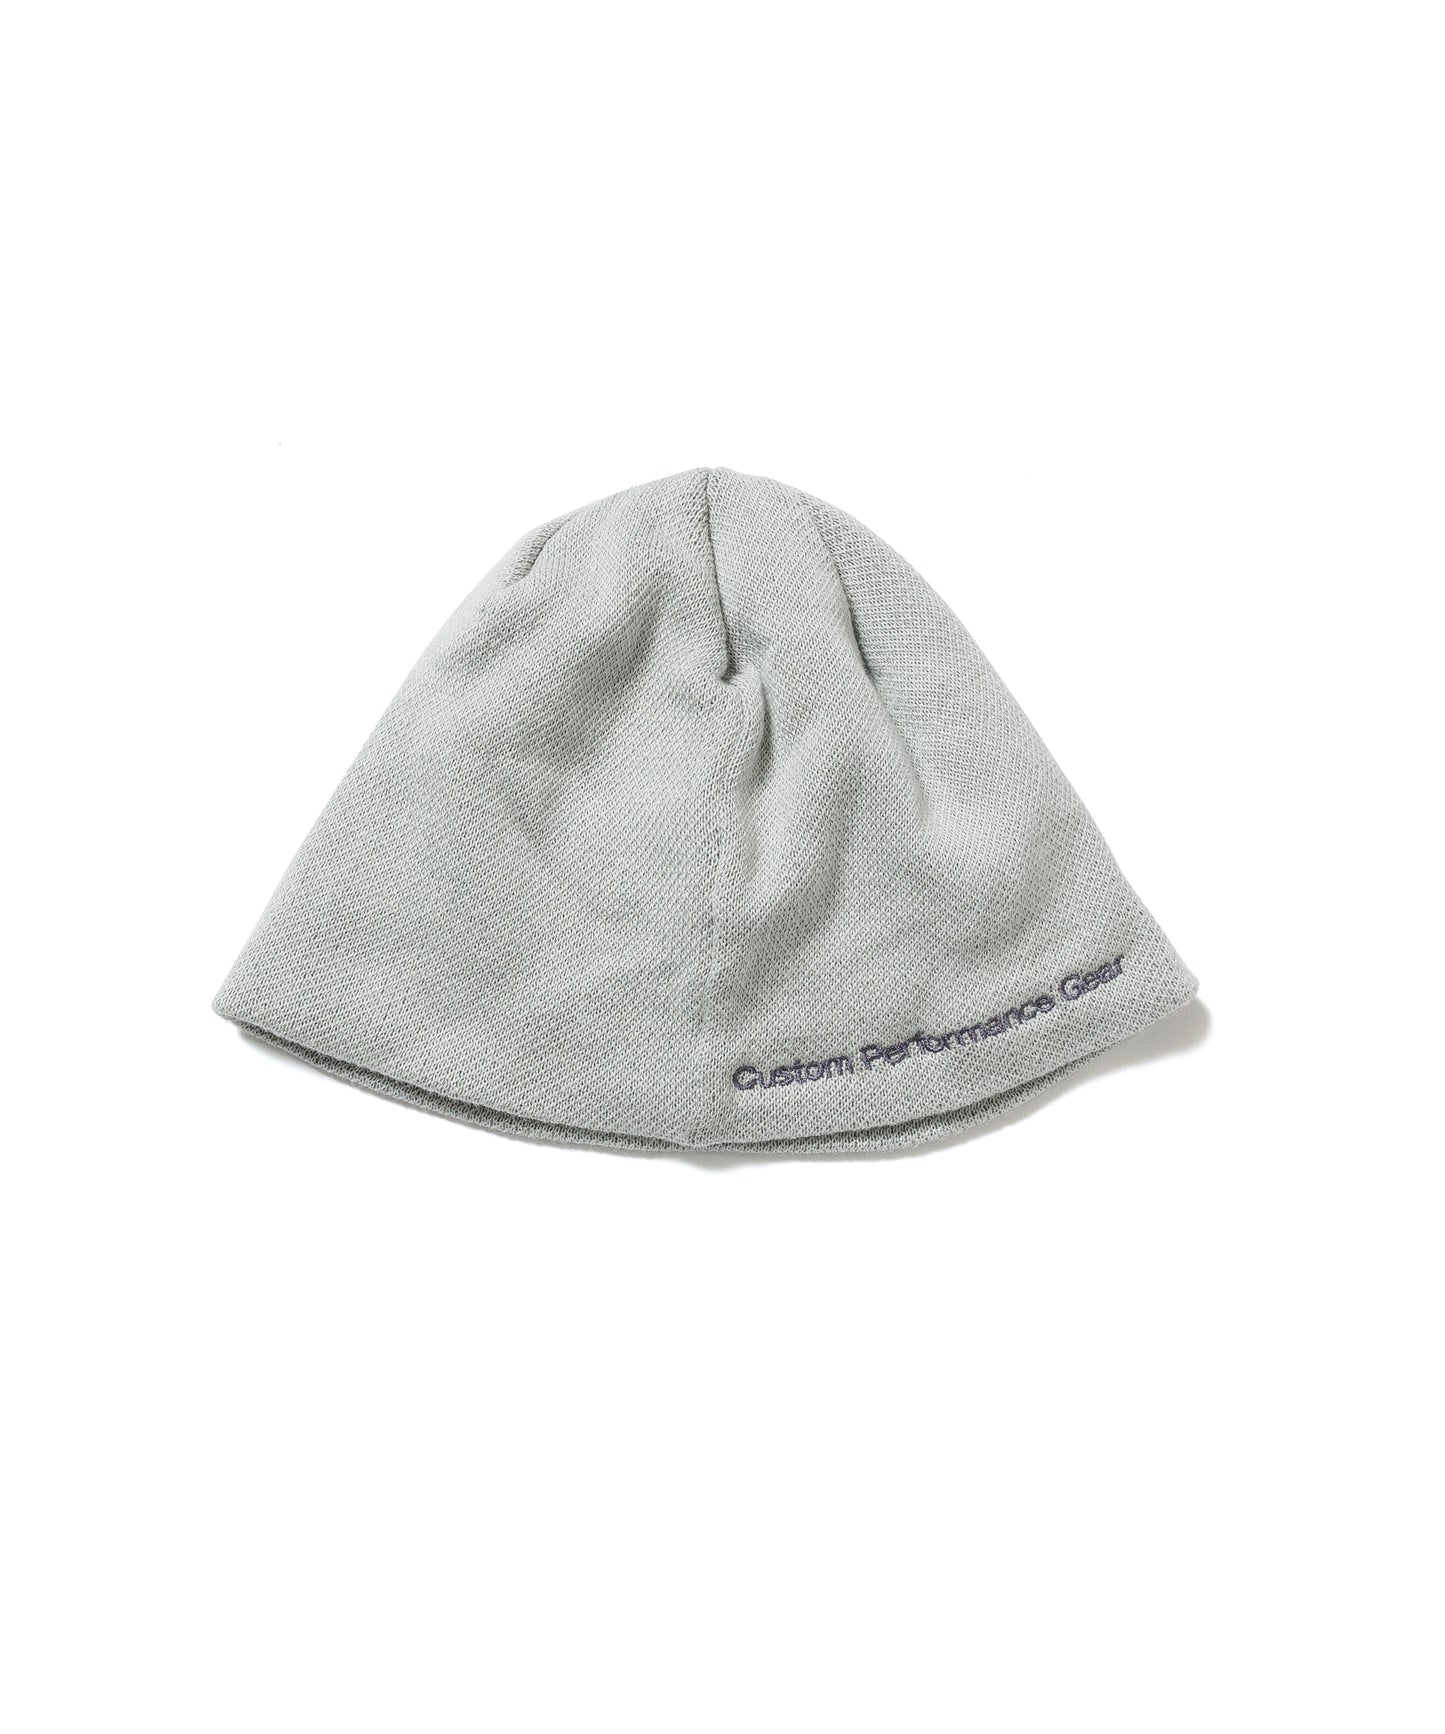 CPG EMBROIDERY KNIT CAP